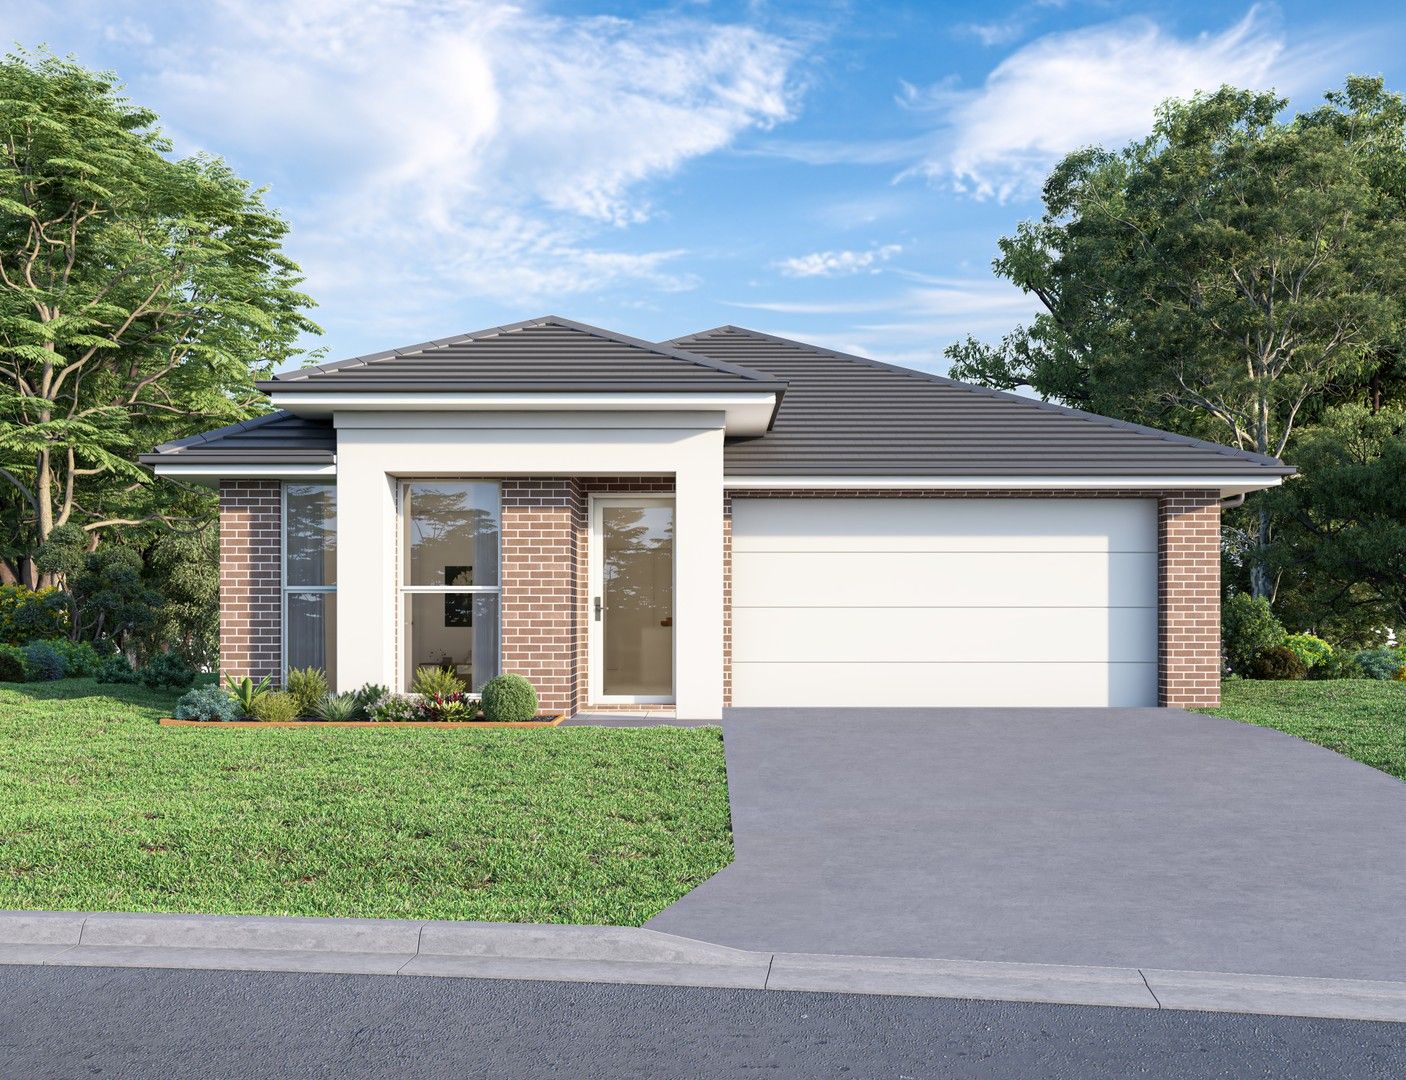 3 bedrooms New House & Land in Lot 6 Proposed Road TAHMOOR NSW, 2573